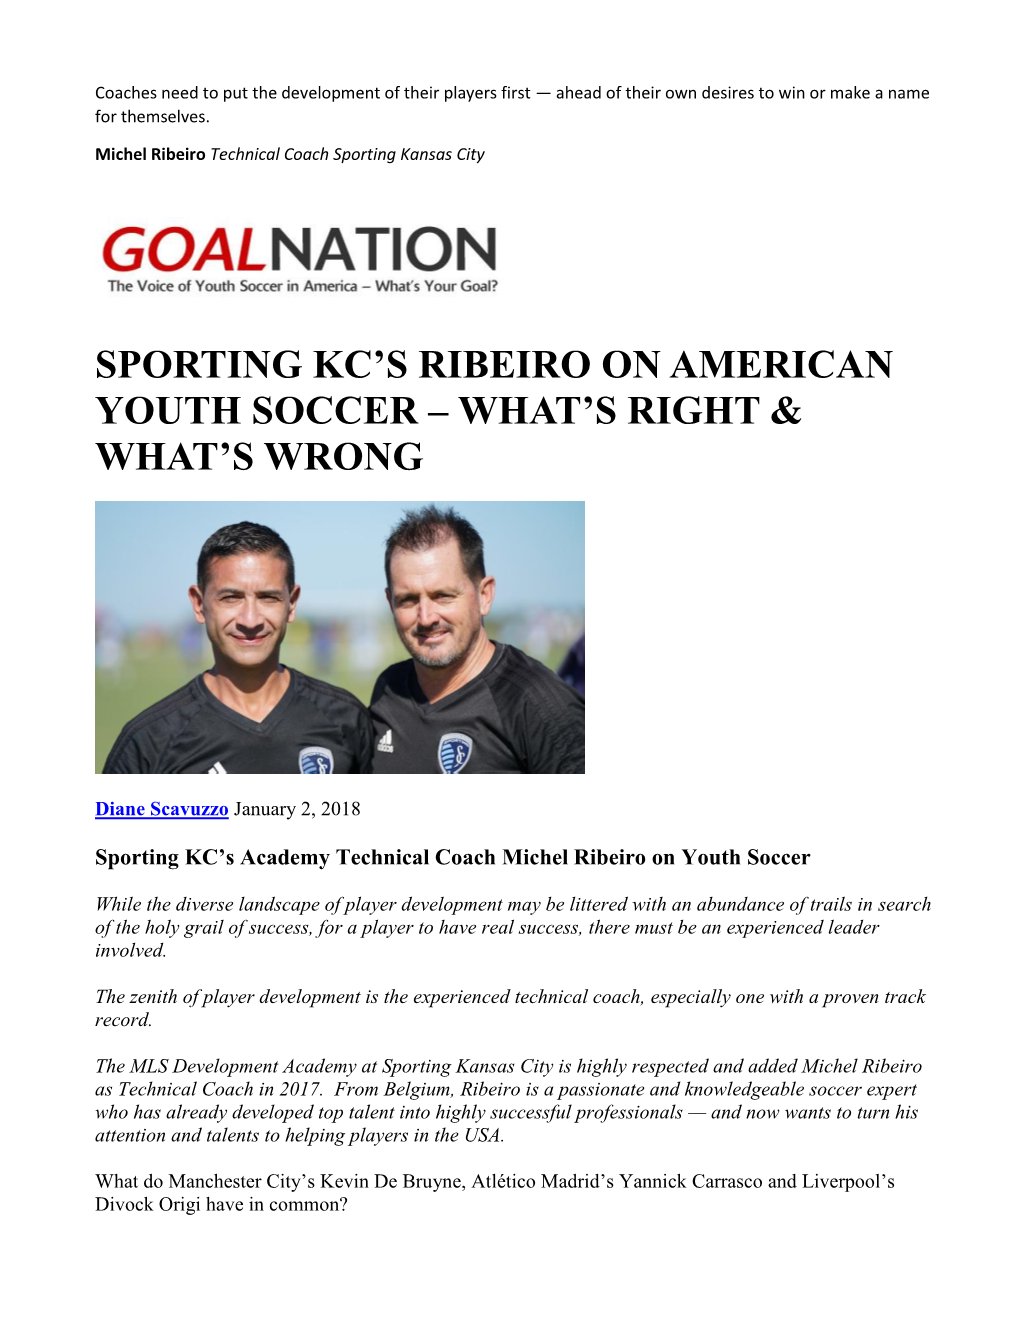 Sporting Kc's Ribeiro on American Youth Soccer